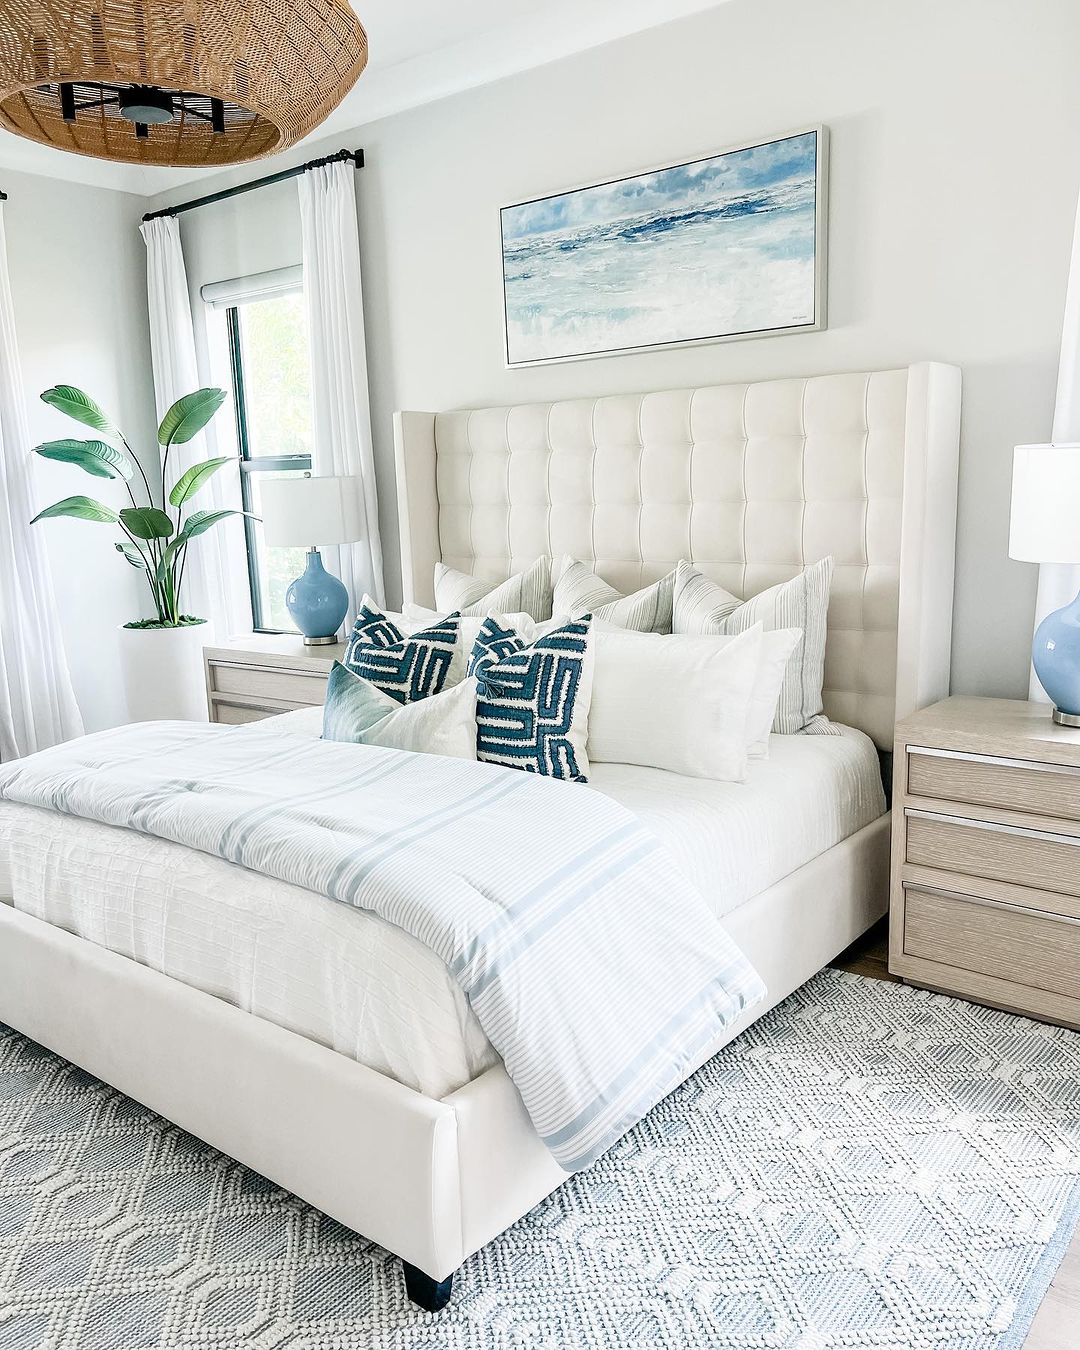  Use Coastal Artwork and Textured Accents